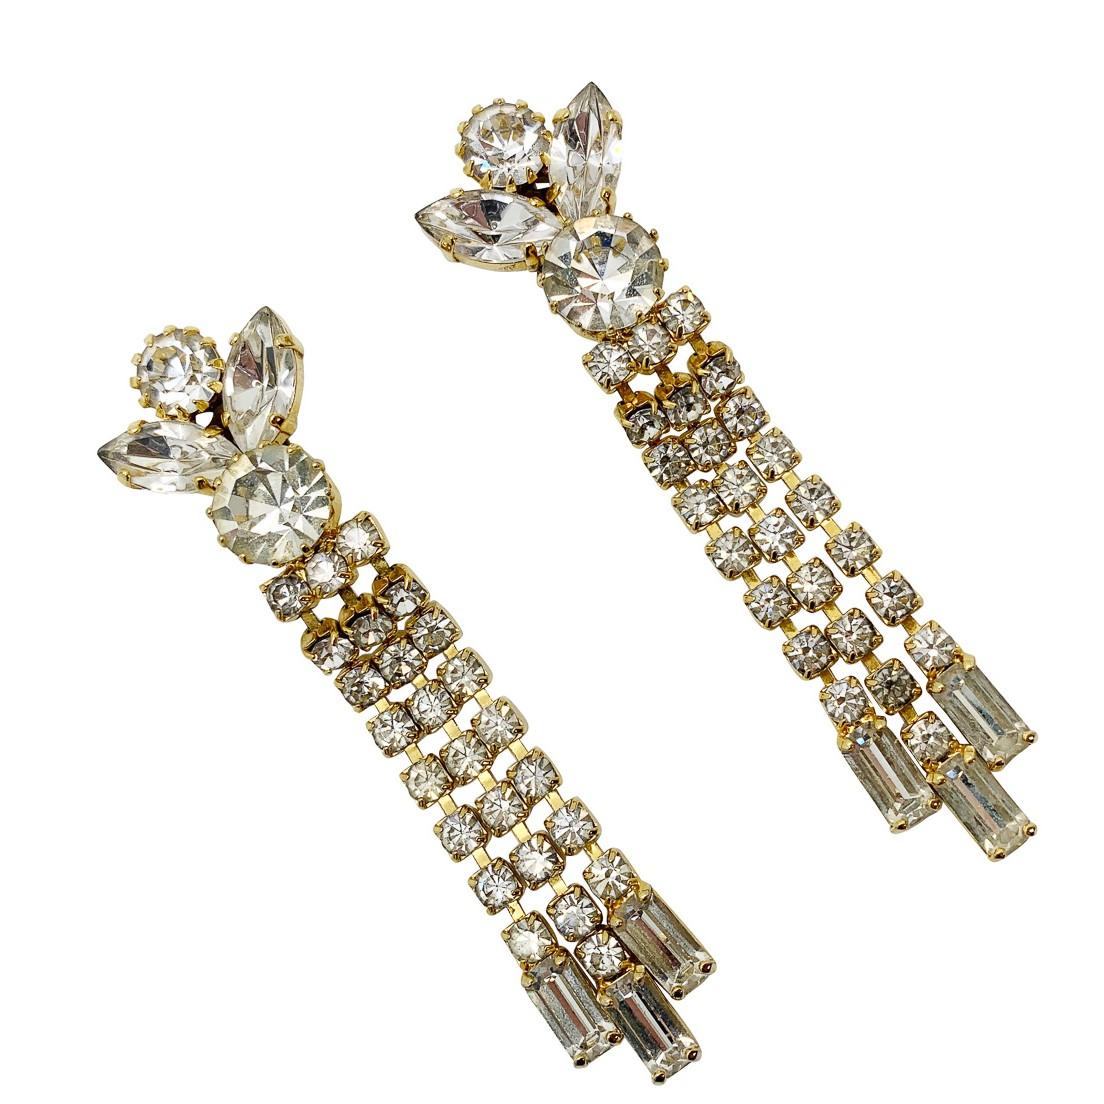 Delightful Vintage Crystal Drop Earrings. Featuring the prettiest fancy cut crystals. Sparkle all the way with these long and lovely creations.

Vintage Condition: Very good without damage or noteworthy wear.
Materials: Gold plated metal, glass